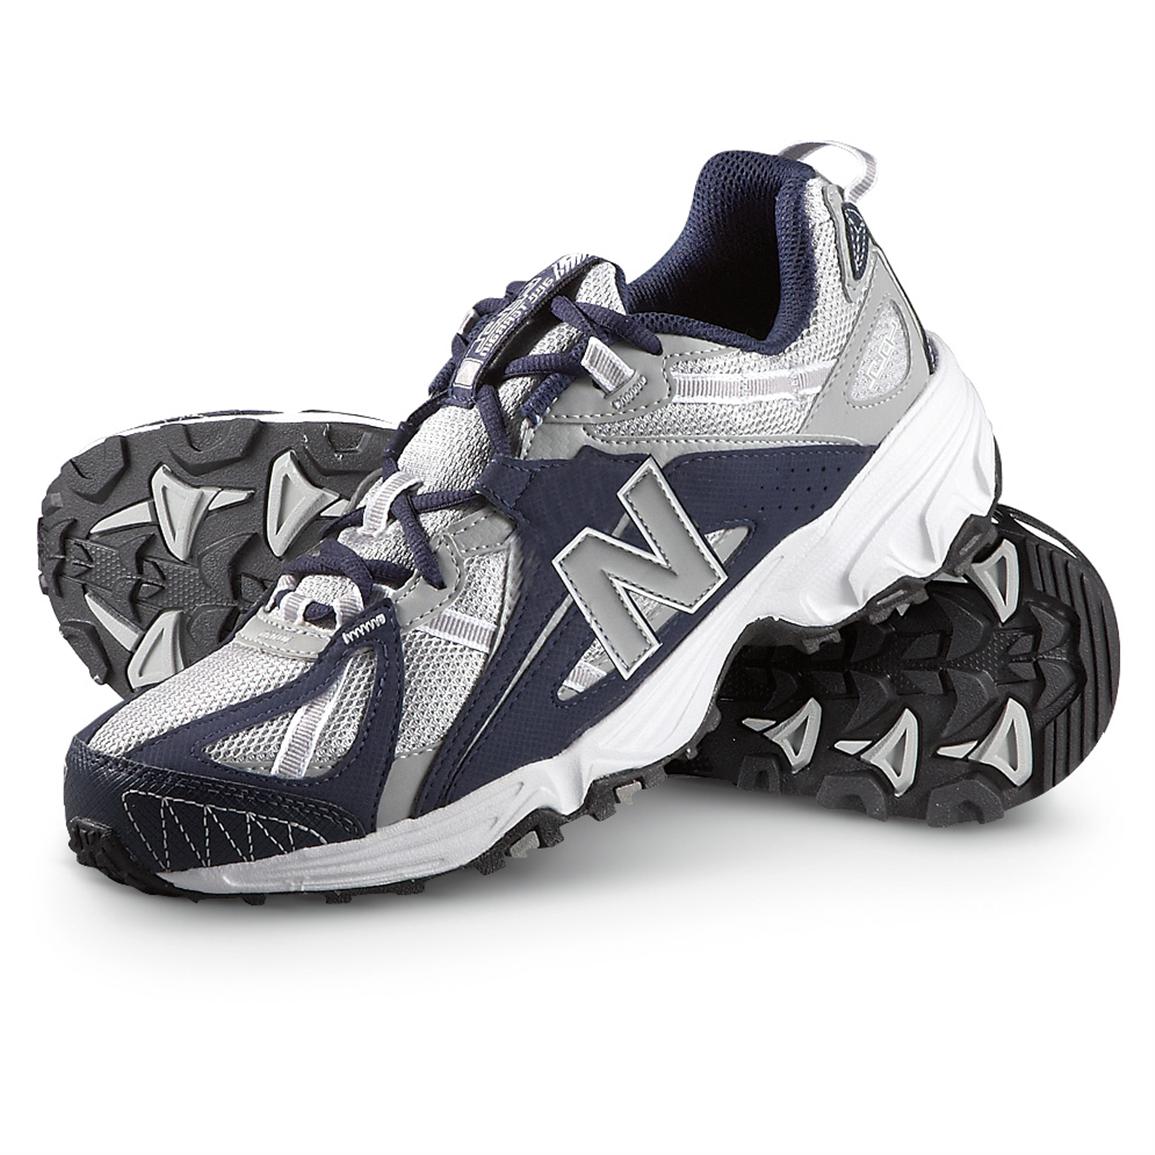 411 Trail Runner Athletic Shoes, Silver 